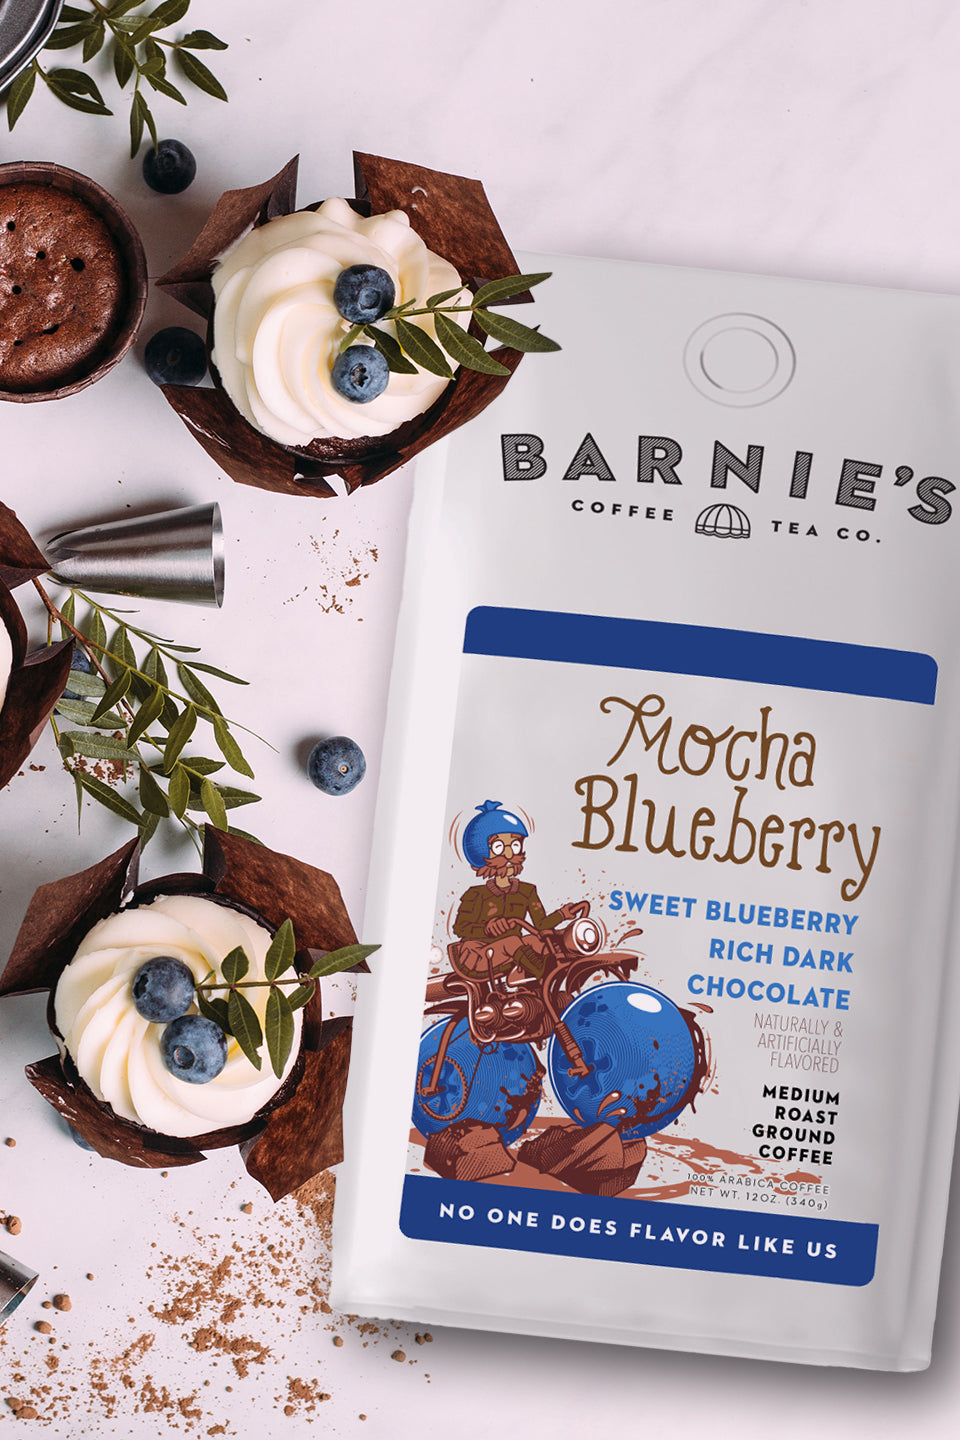 Dustin Finch (Director of Coffee Programming) discusses the inspiration behind Barnie's Mocha Blueberry Flavor